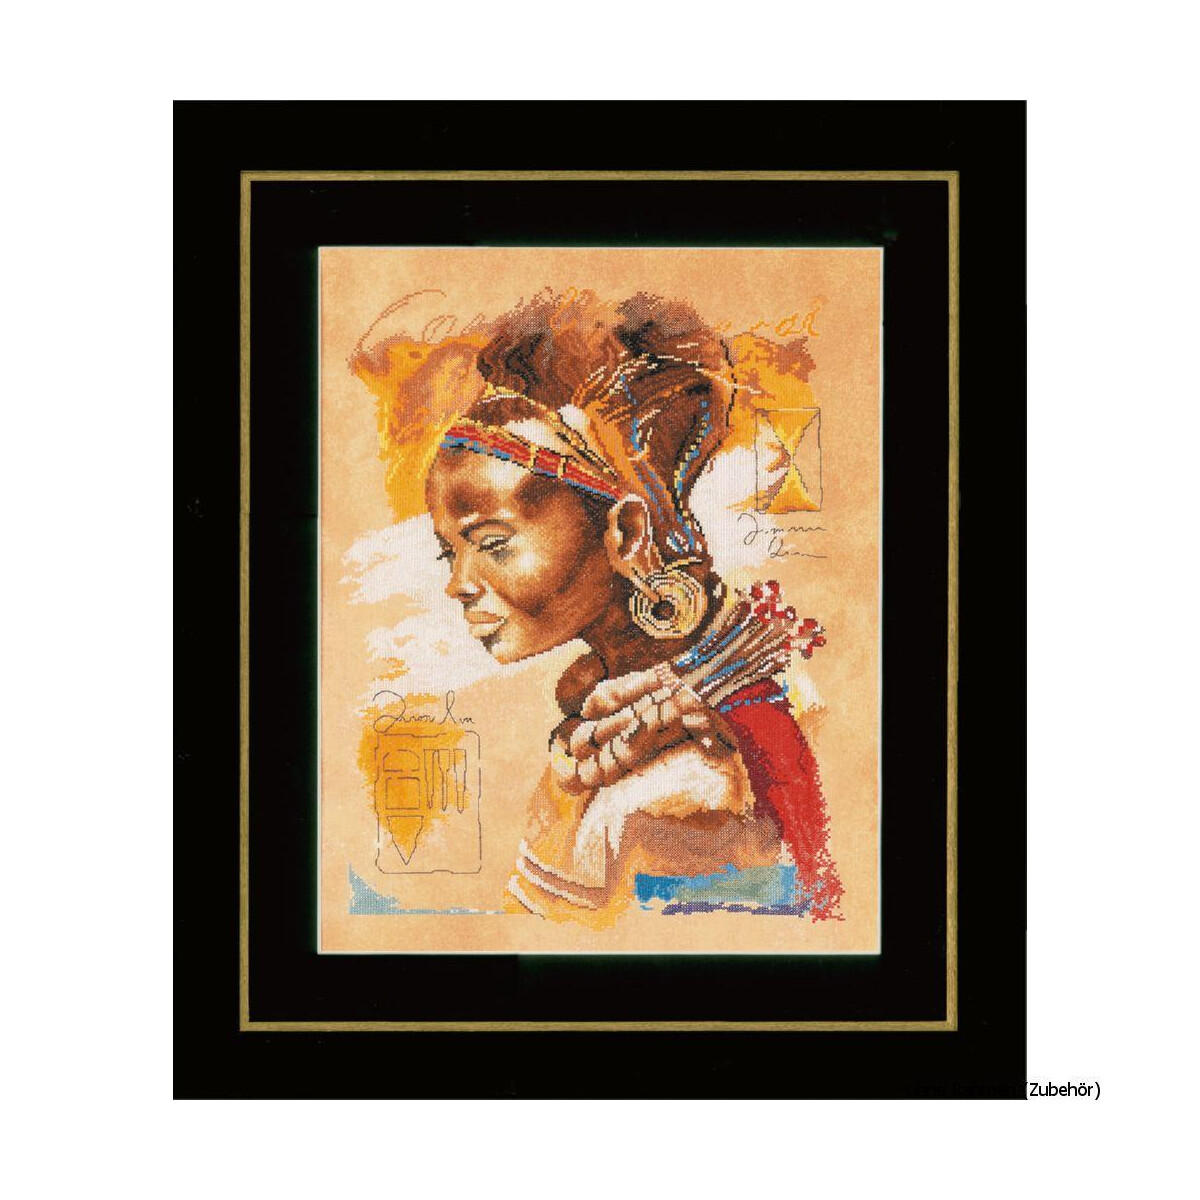 A framed artwork shows the side profile of a woman...